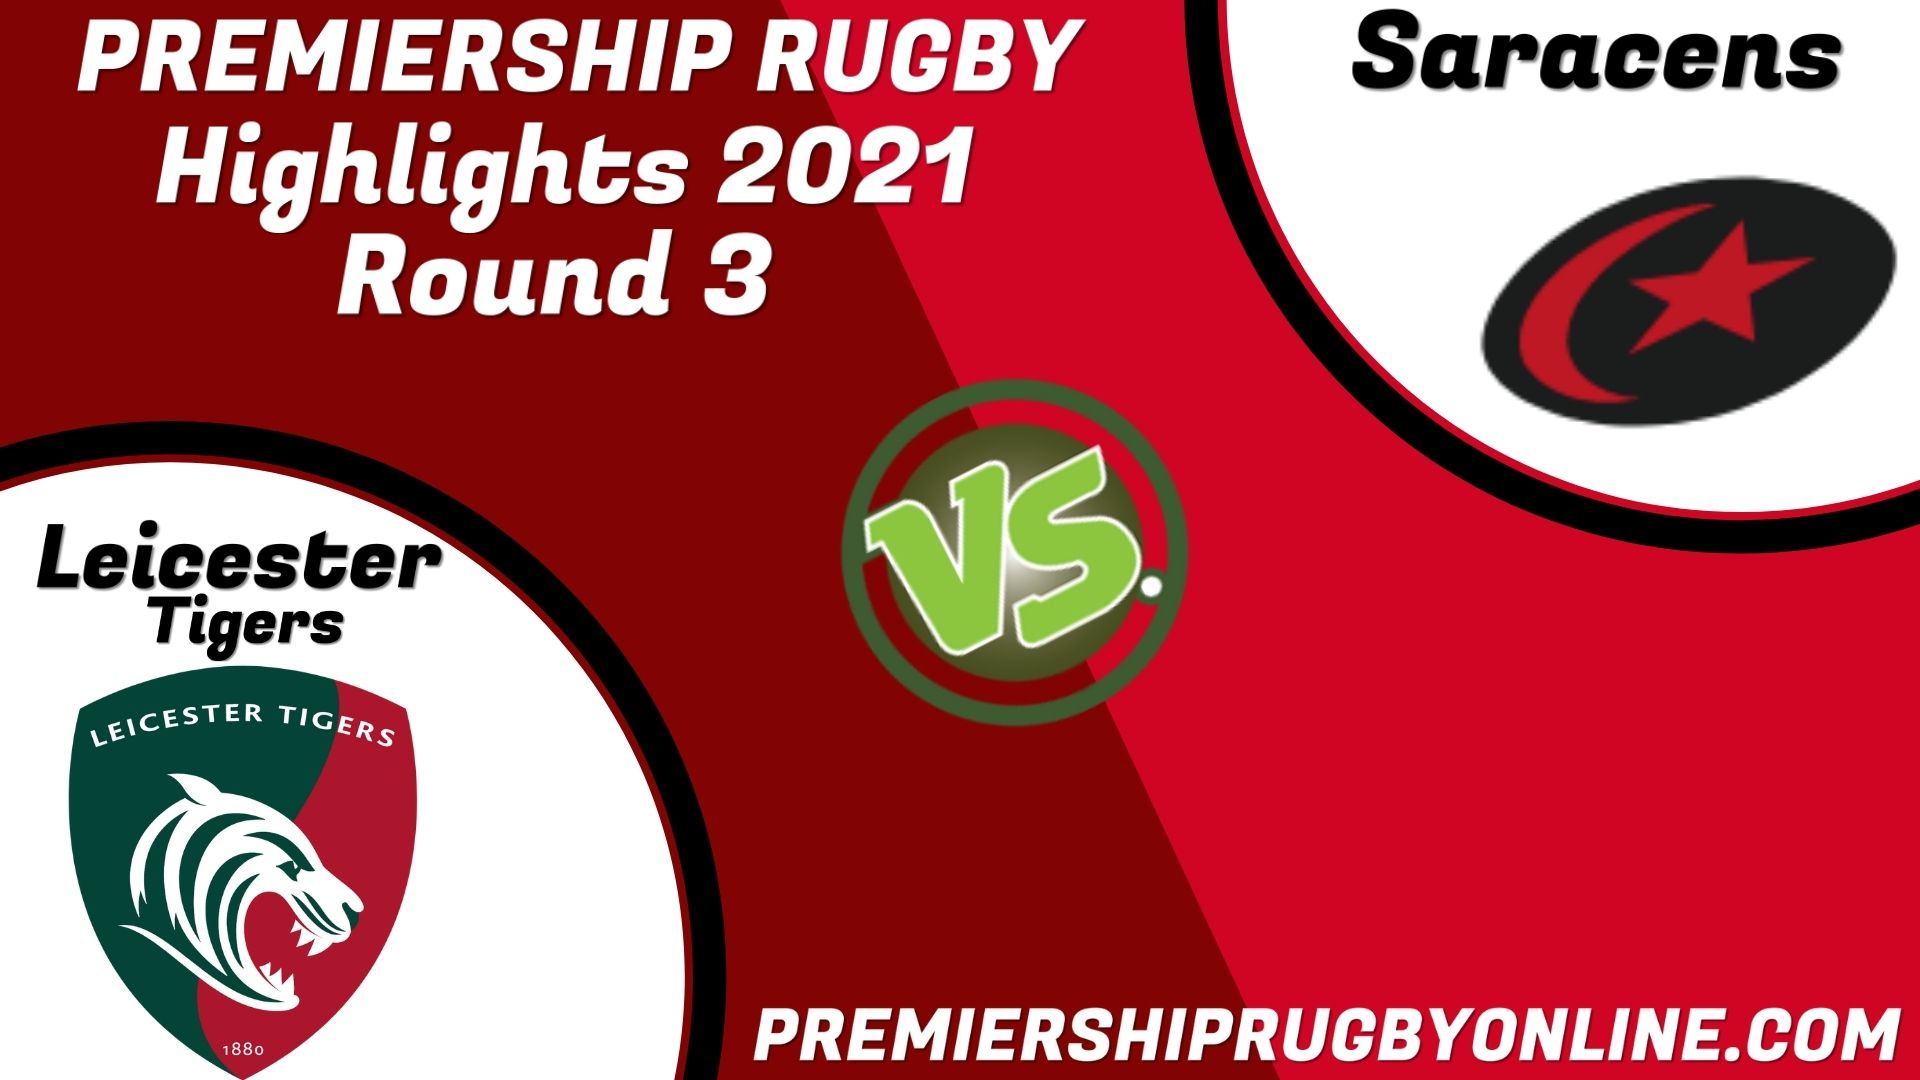 Leicester Tigers Vs Saracens Highlights 2021 RD 3